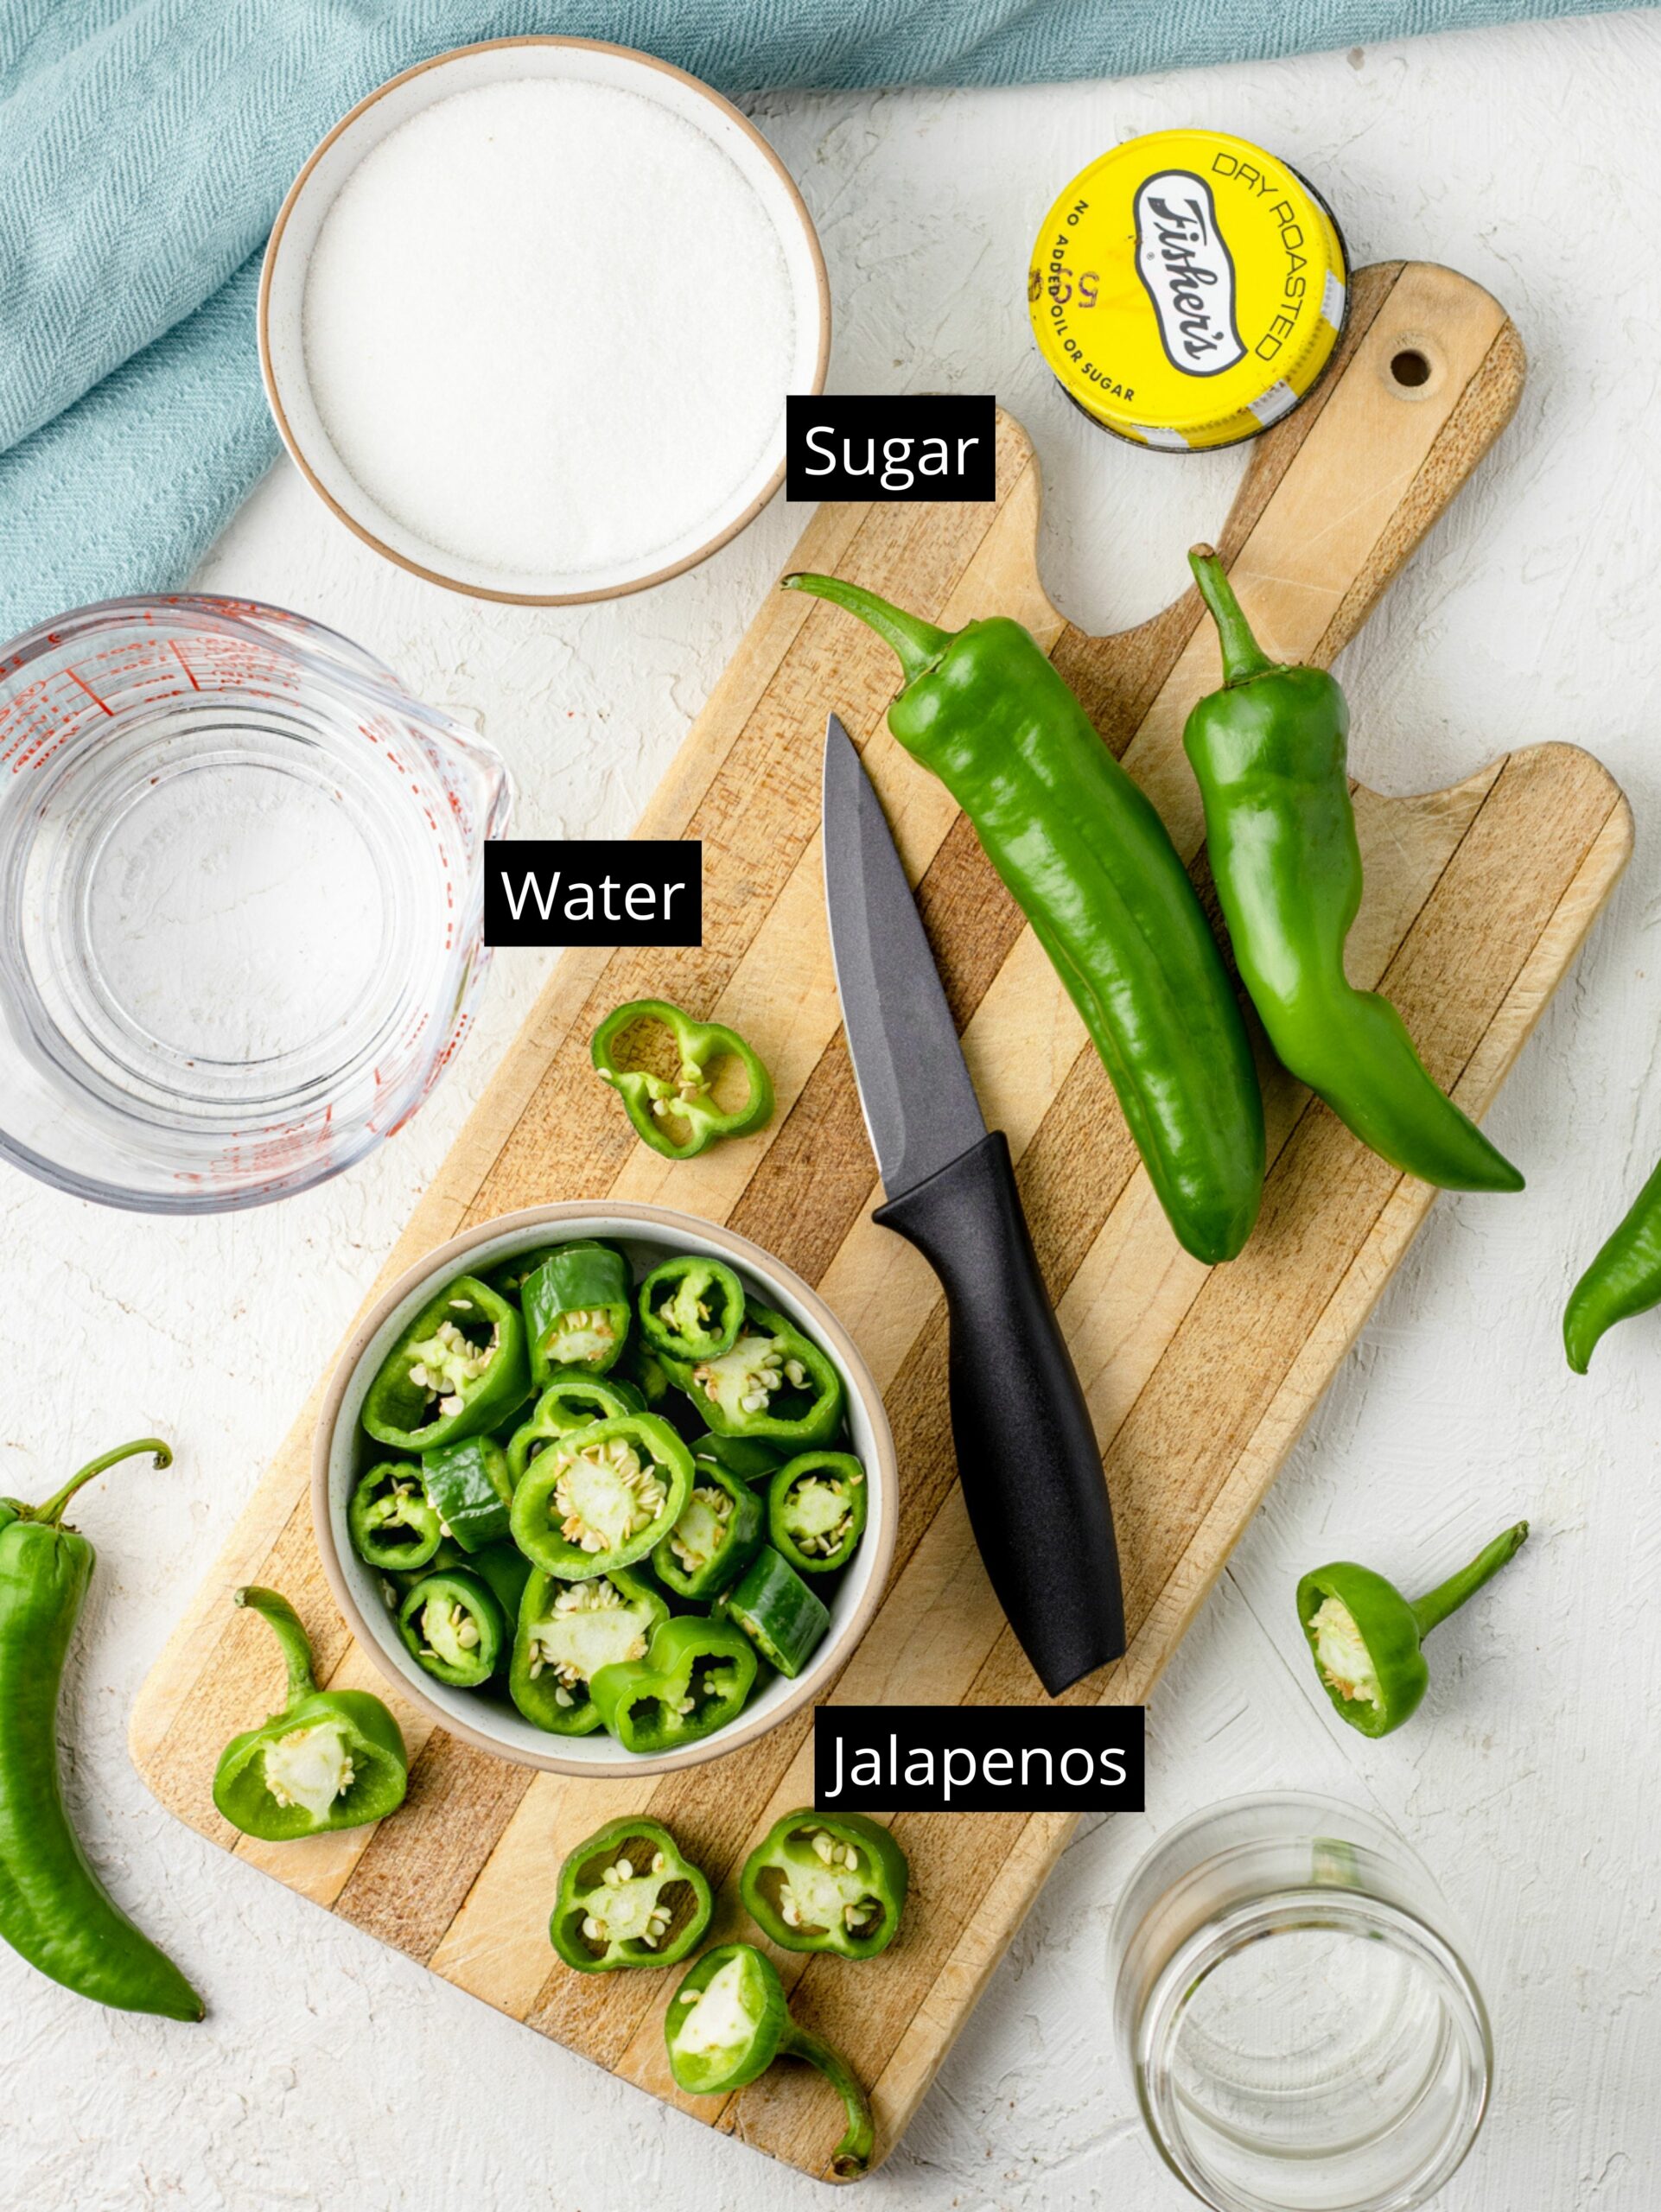 Ingredients for Jalapeno Simple Syrup: sugar, water, and sliced jalapenos with their seeds.